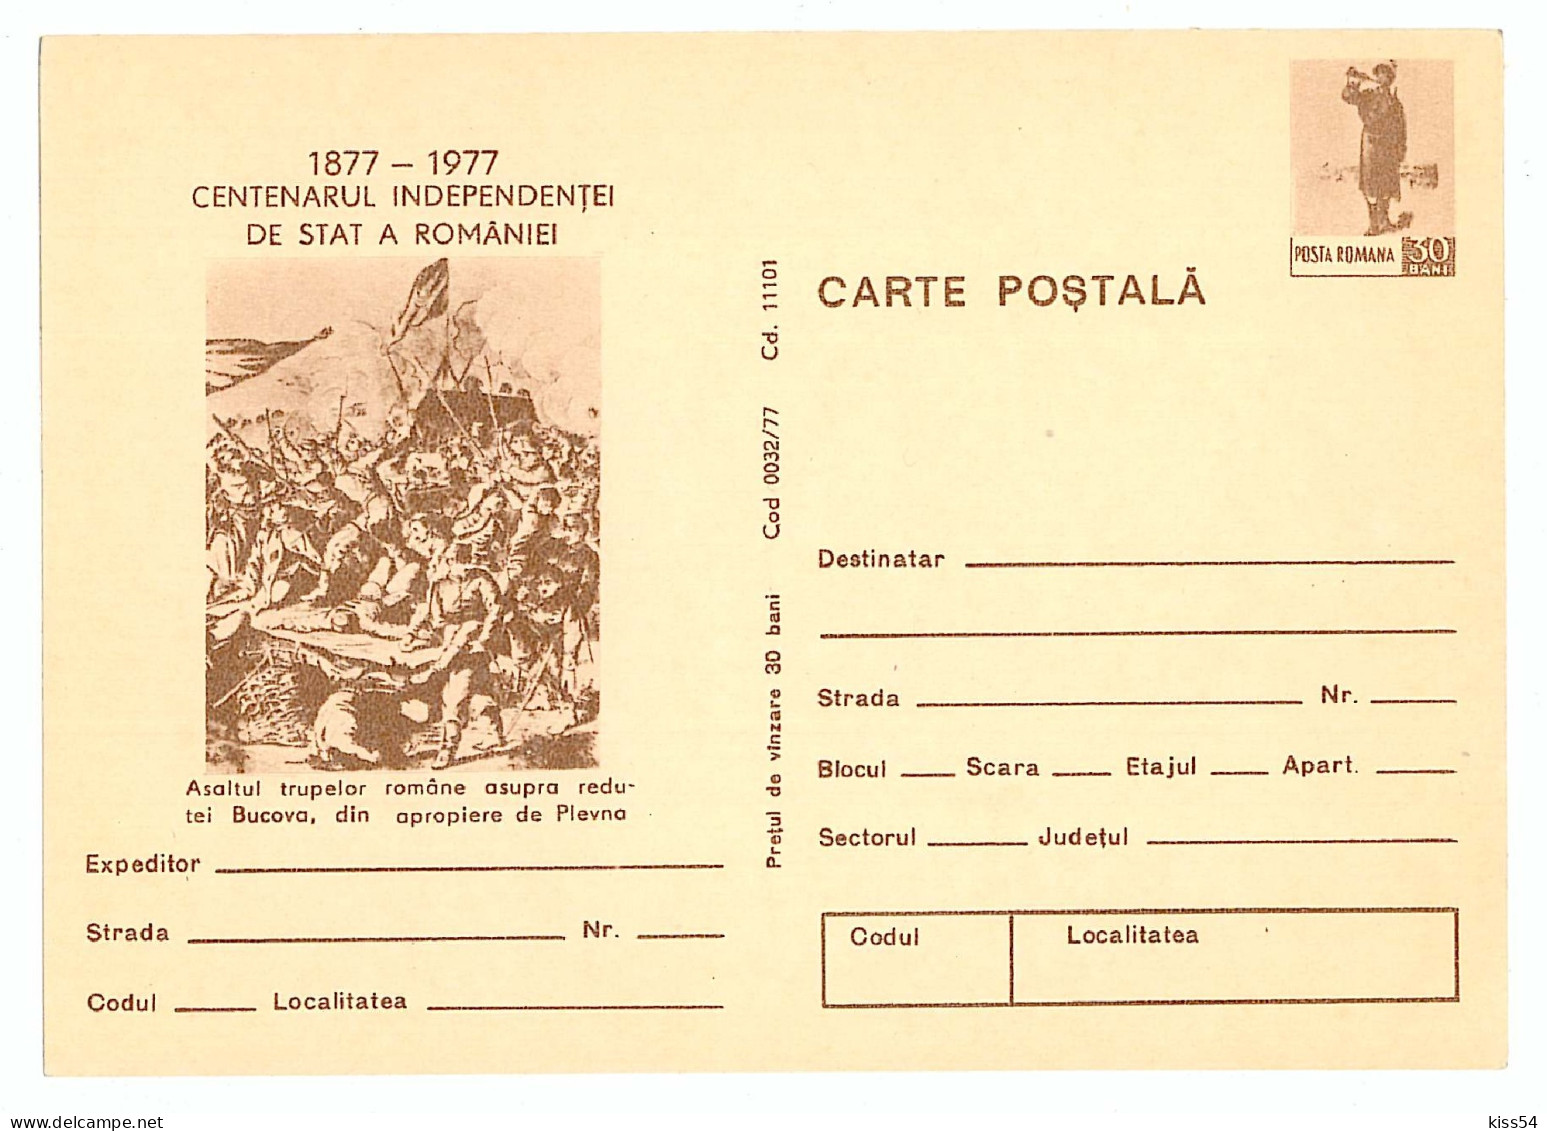 IP 77 A - 32a Centenary Independence Of Romania - Stationery - Unused - 1977 - Postal Stationery